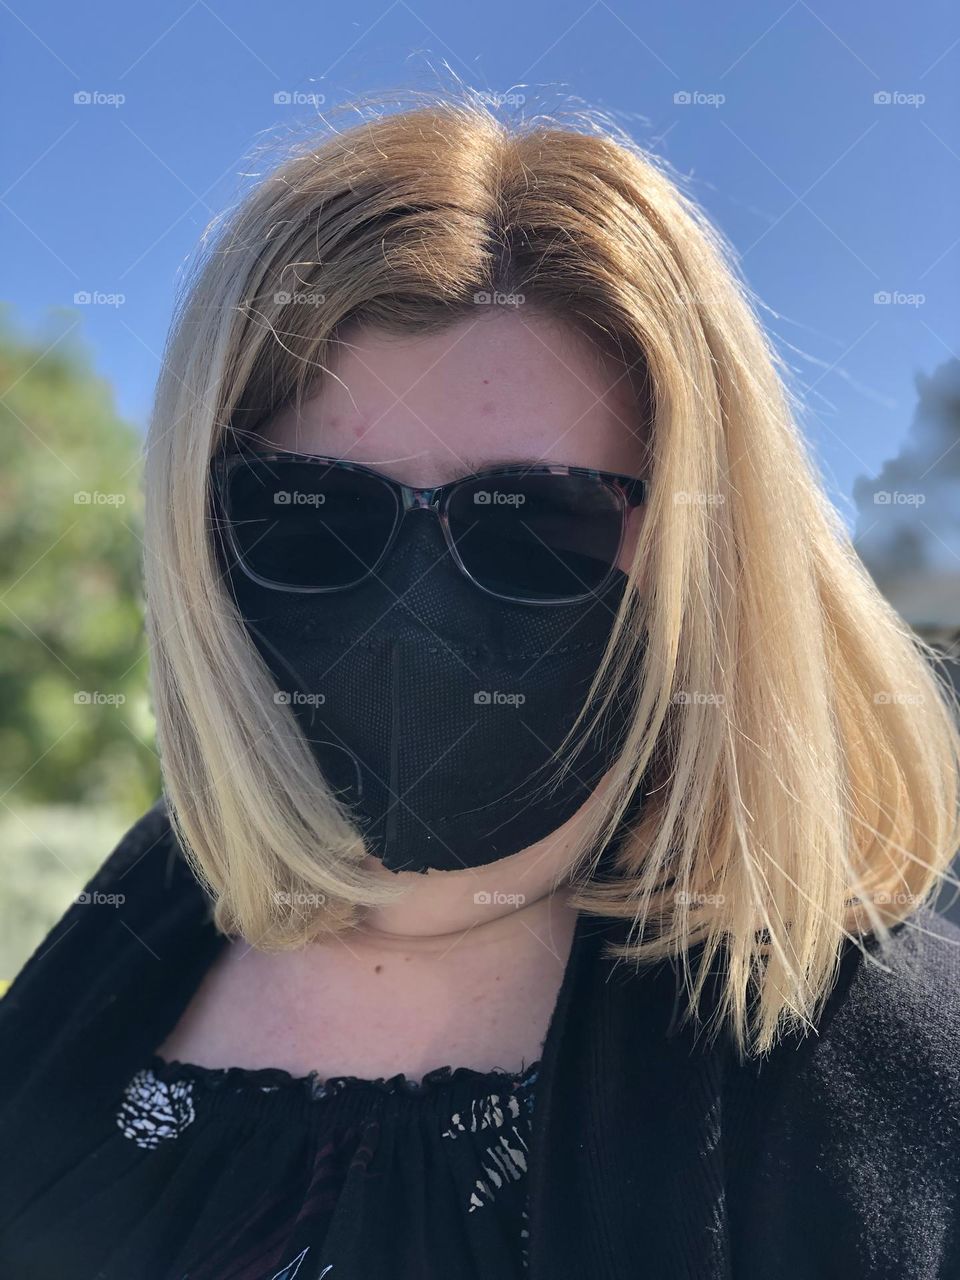 Mysterious Woman wearing mask and dark sunglasses reminds me of a Siamese cat